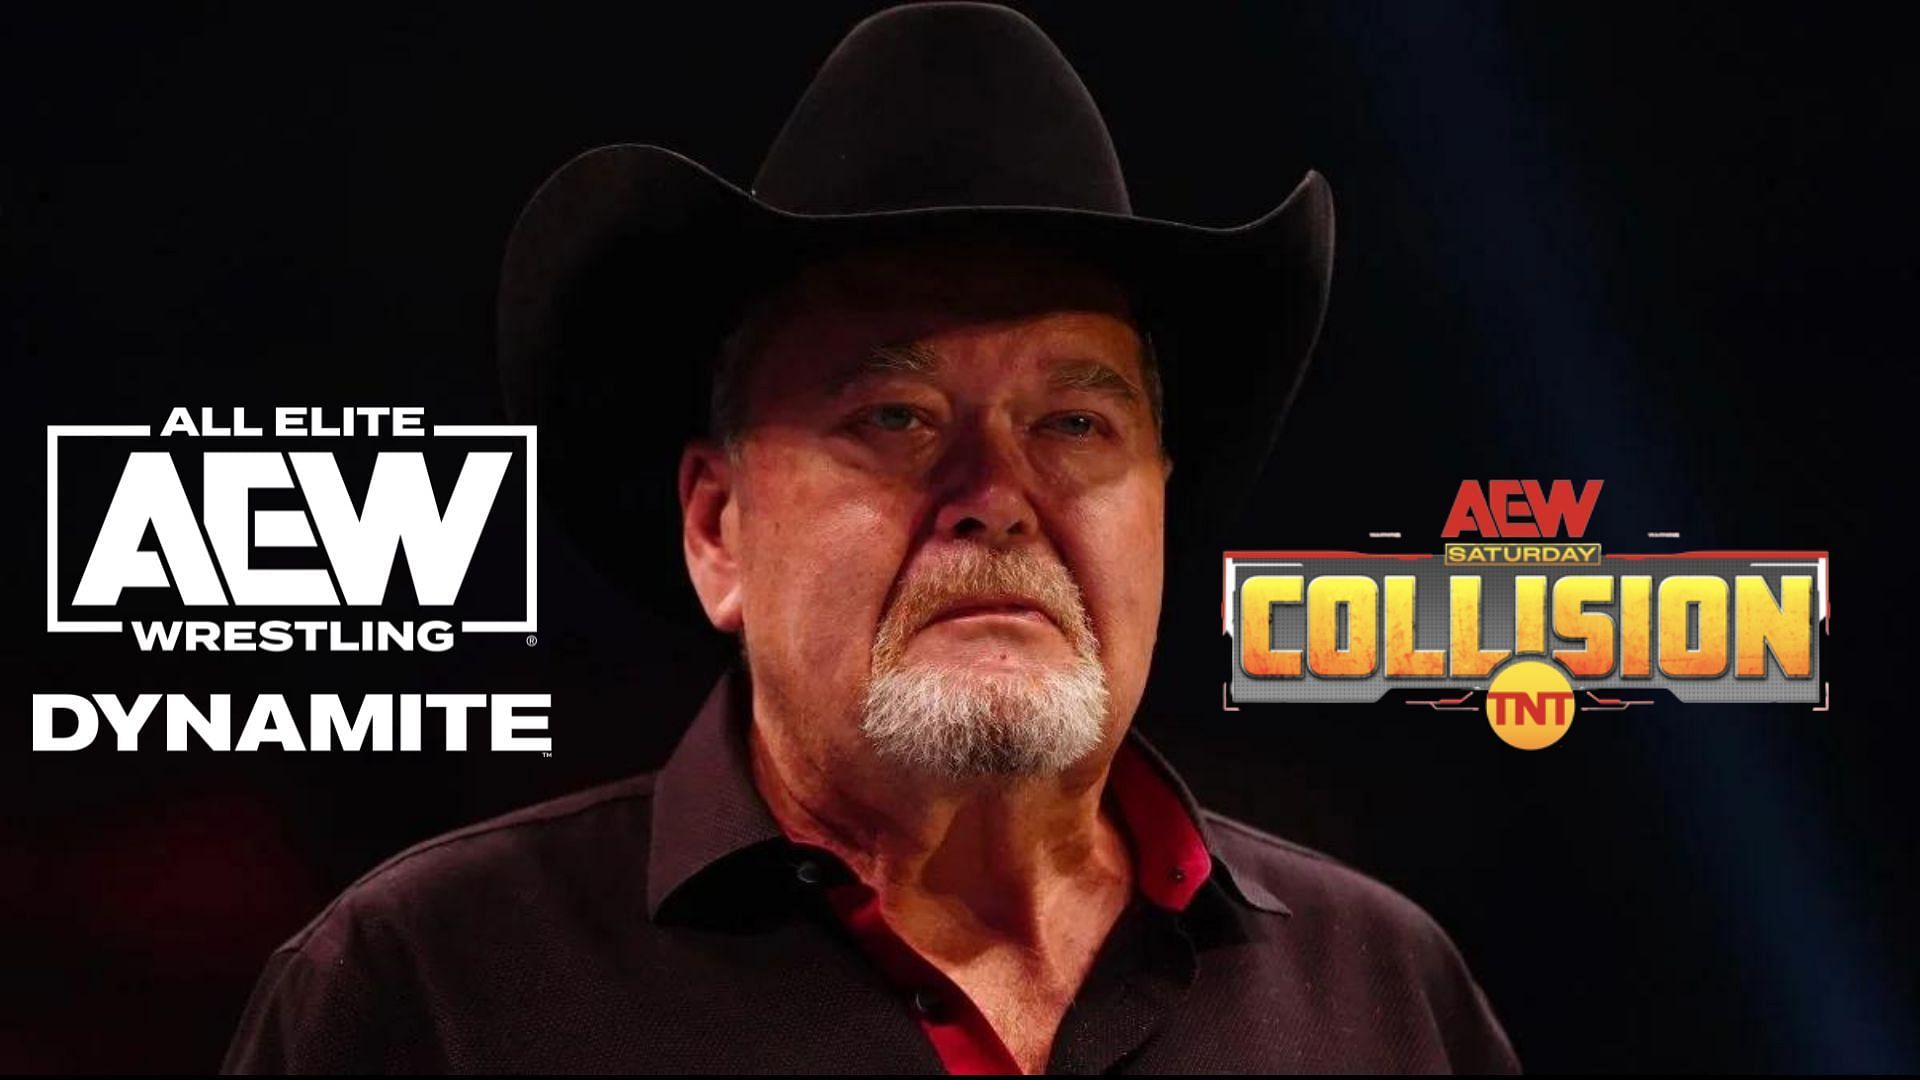 Jim Ross had some interesting thoughts to share this week